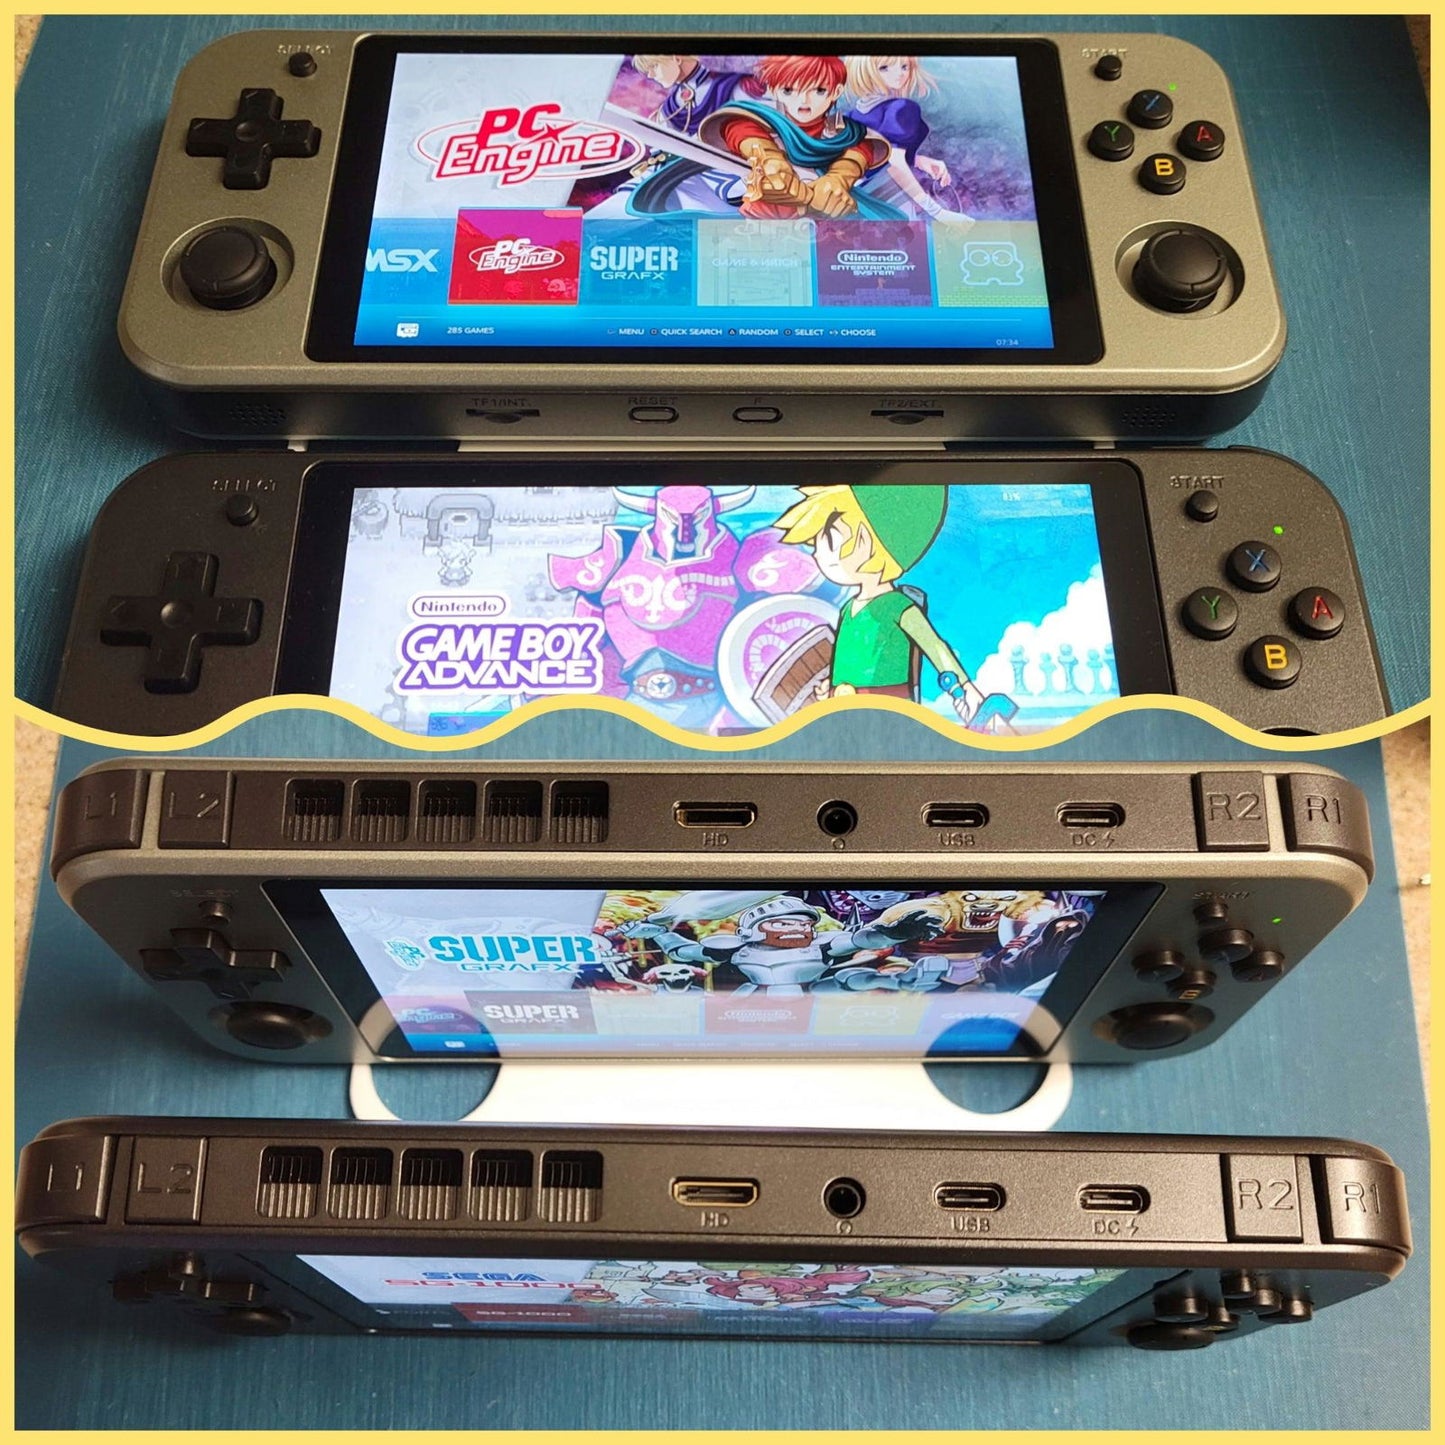 New Anbernic RG552 handheld gaming console, dual boot Android & 256GB Linux OS SD card, 55+ systems - Arcadeclassics